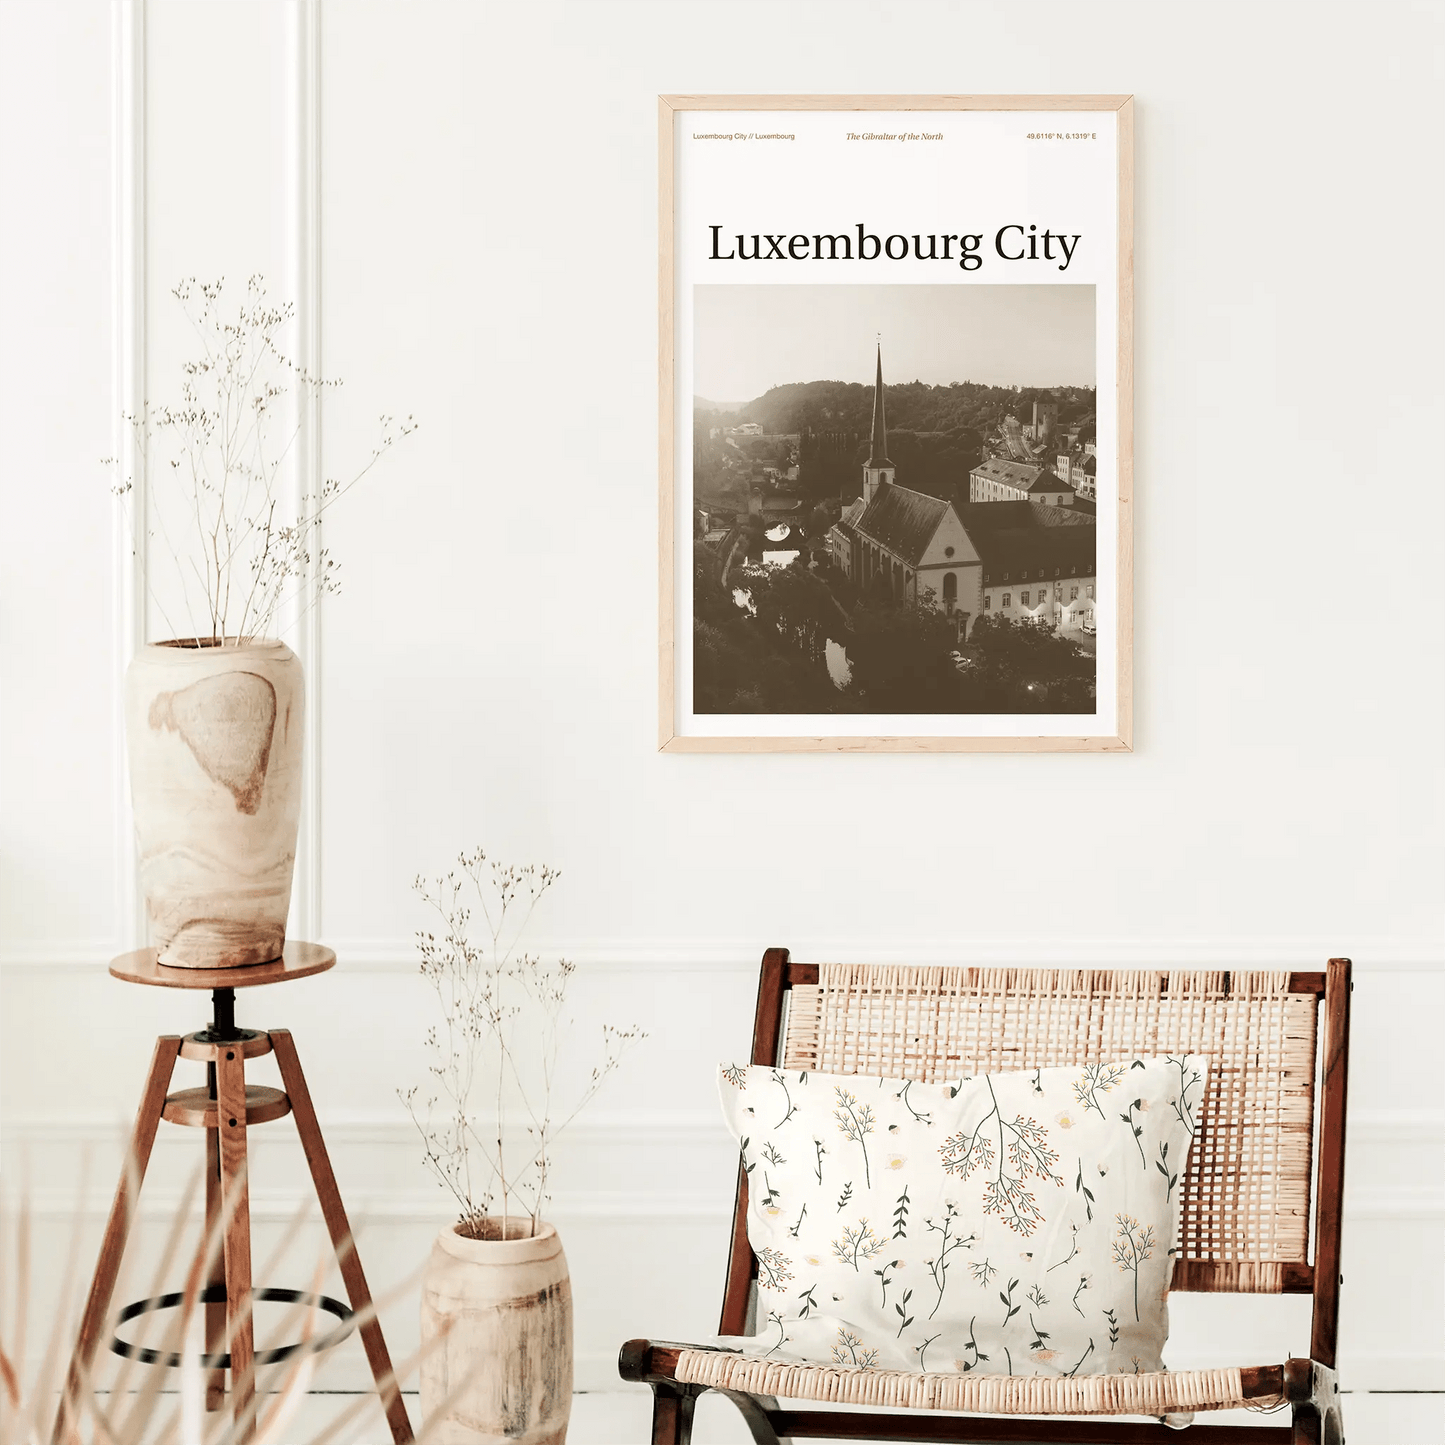 Luxembourg City Essence Poster - The Globe Gallery